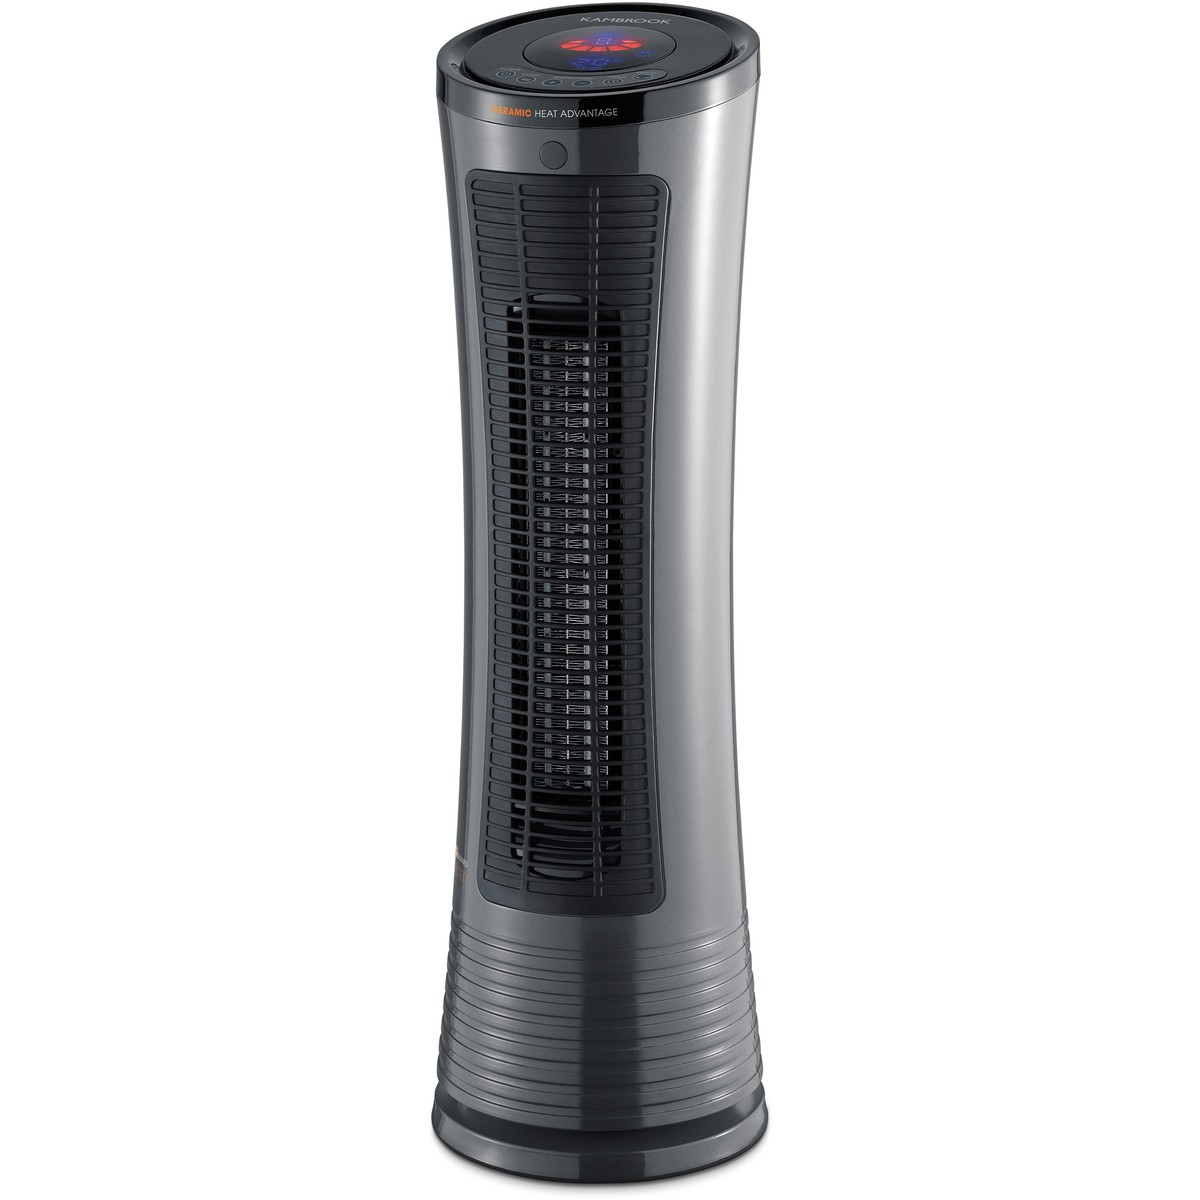 Kambrook Ceramic Tower Heater 2000w Kce240 throughout dimensions 1200 X 1200